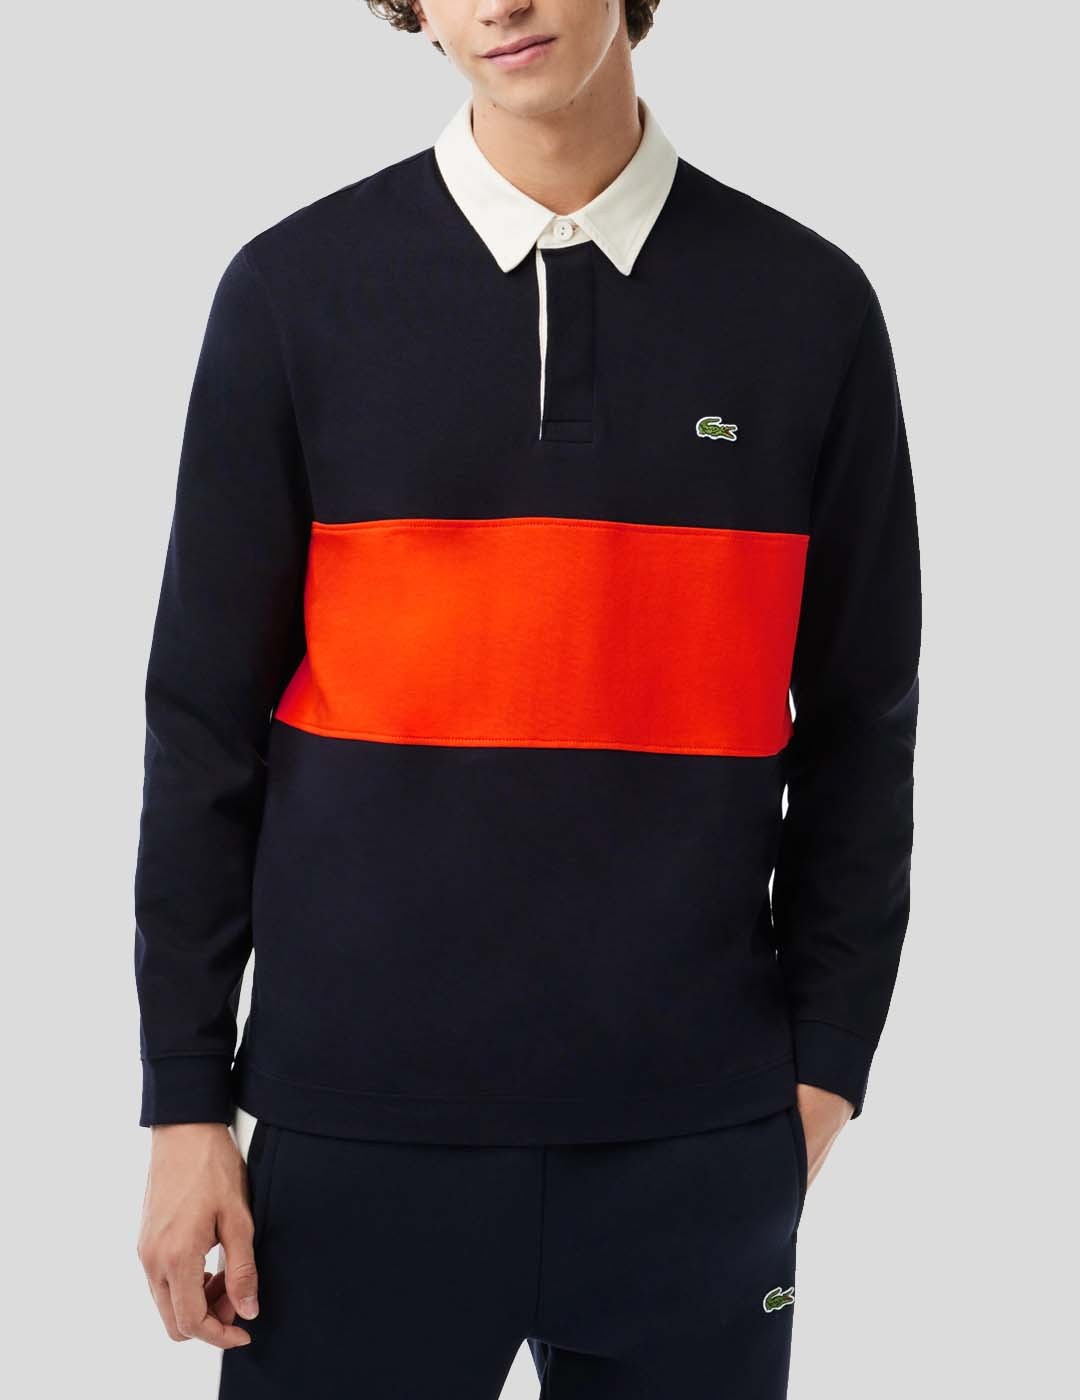 CAMISETA LACOSTE POLO COLORBLOCK RUGBY  ABIMES/SUNRISE